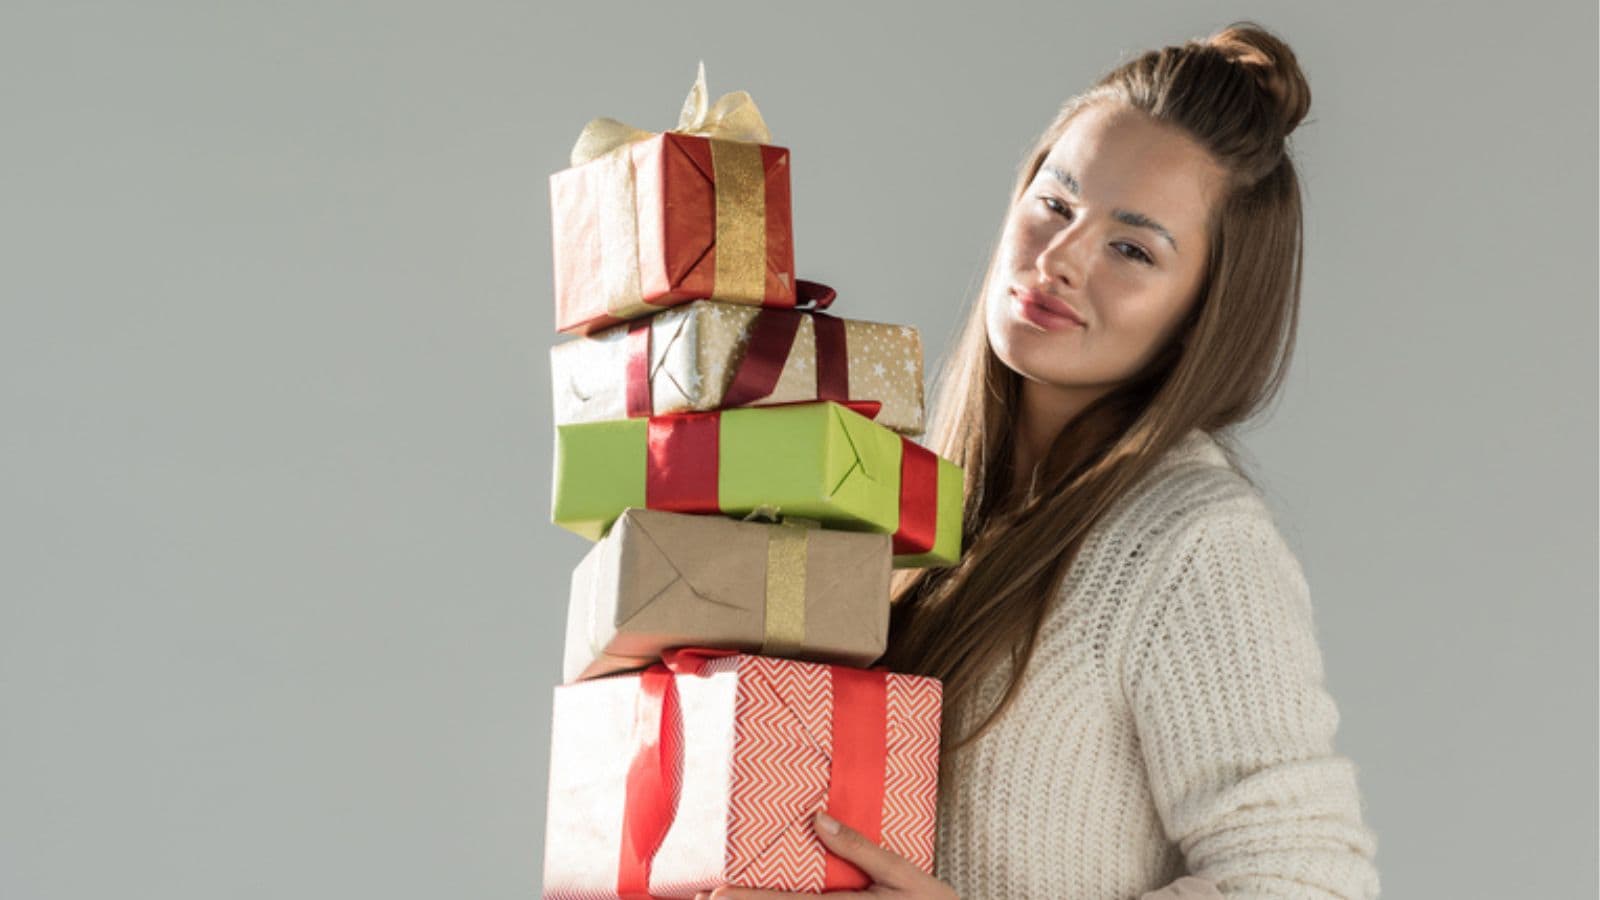 Attractive woman in fashionable winter outfit holding gift boxes